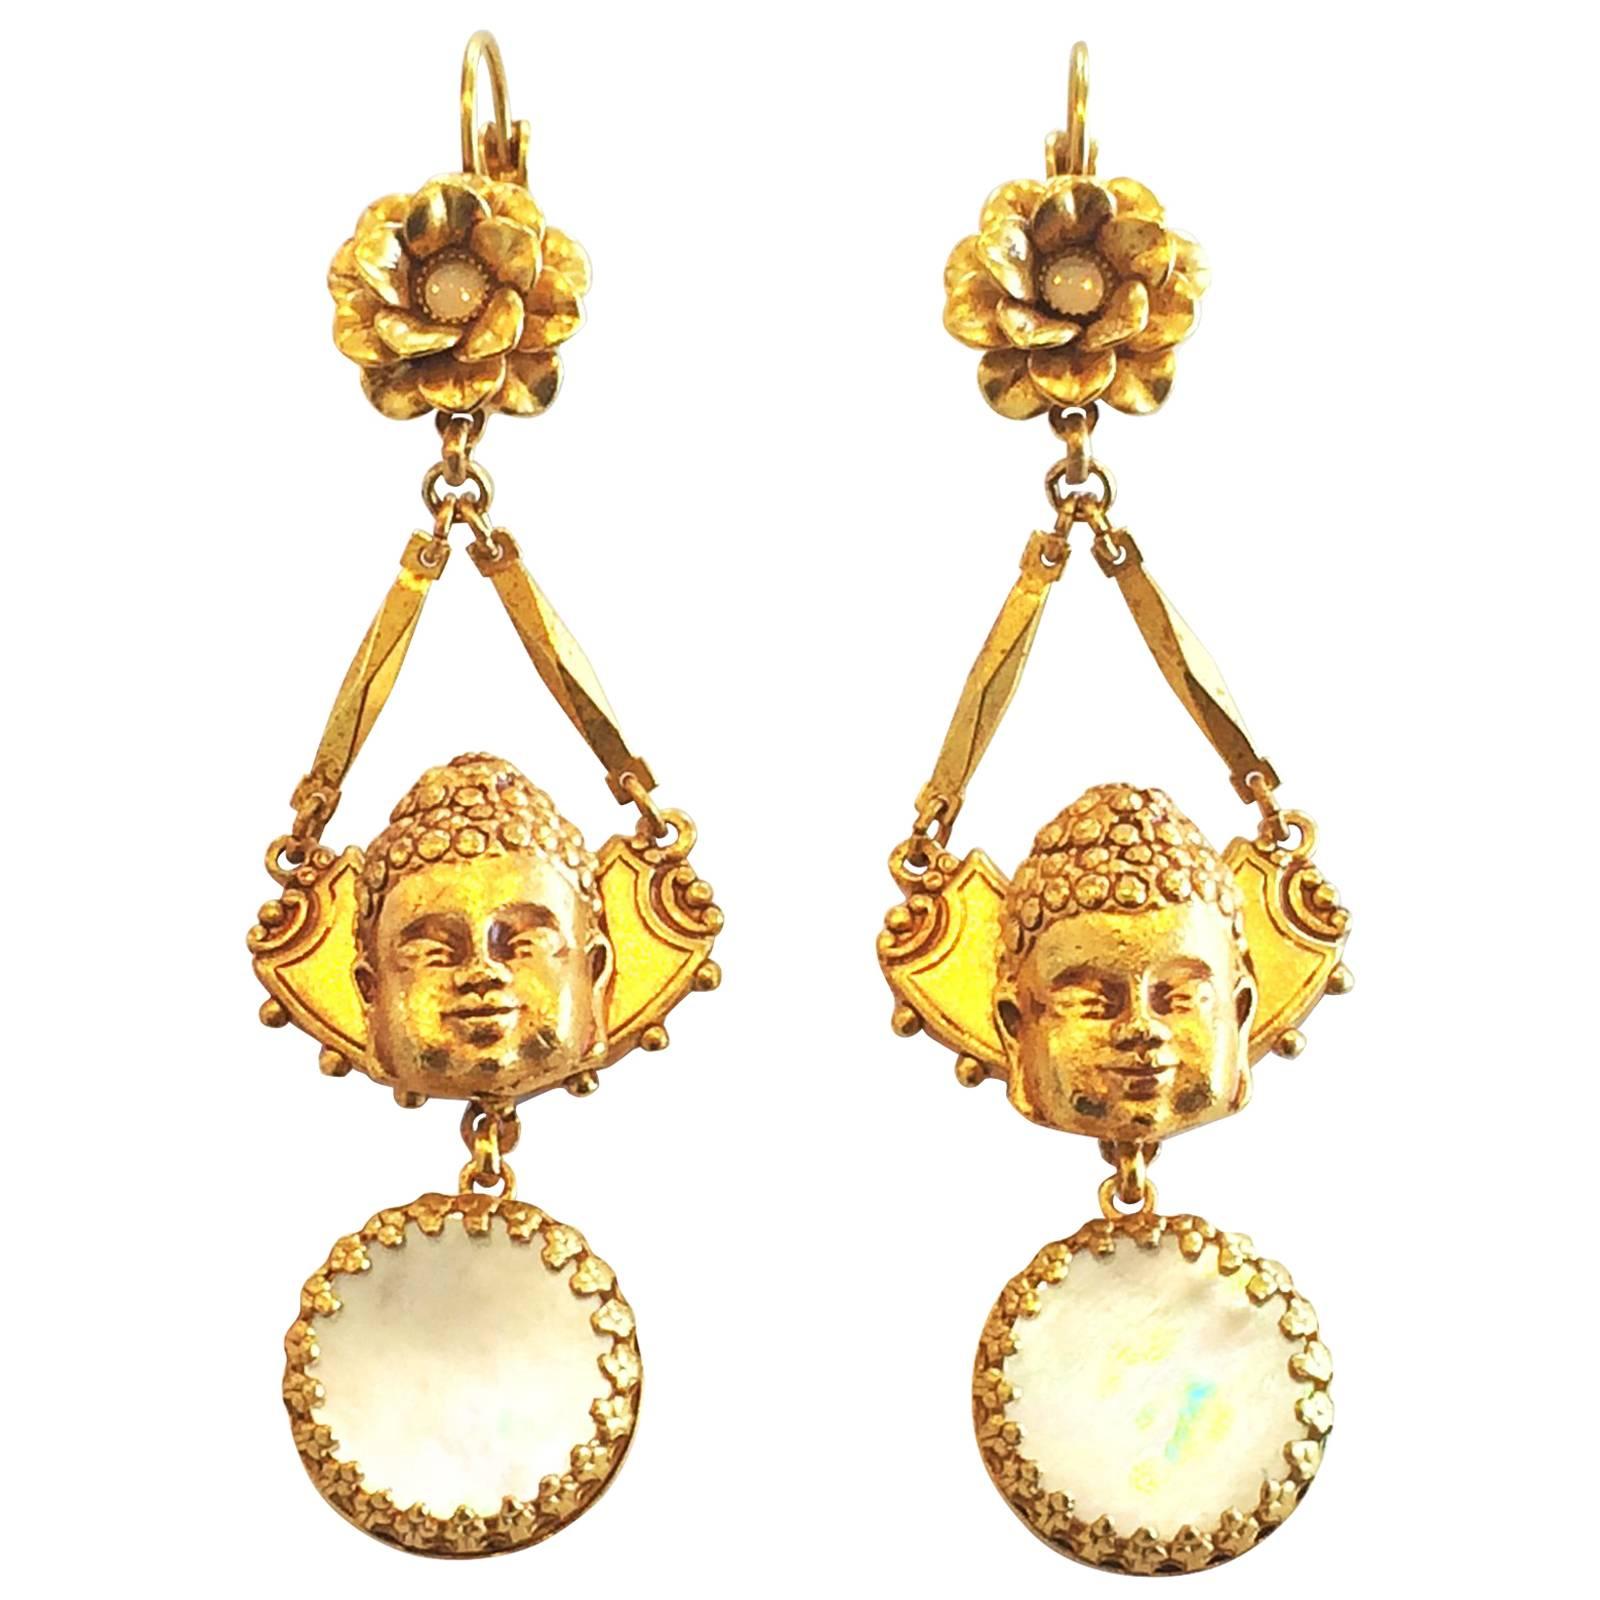 Askew of London Buddha and flower earrings